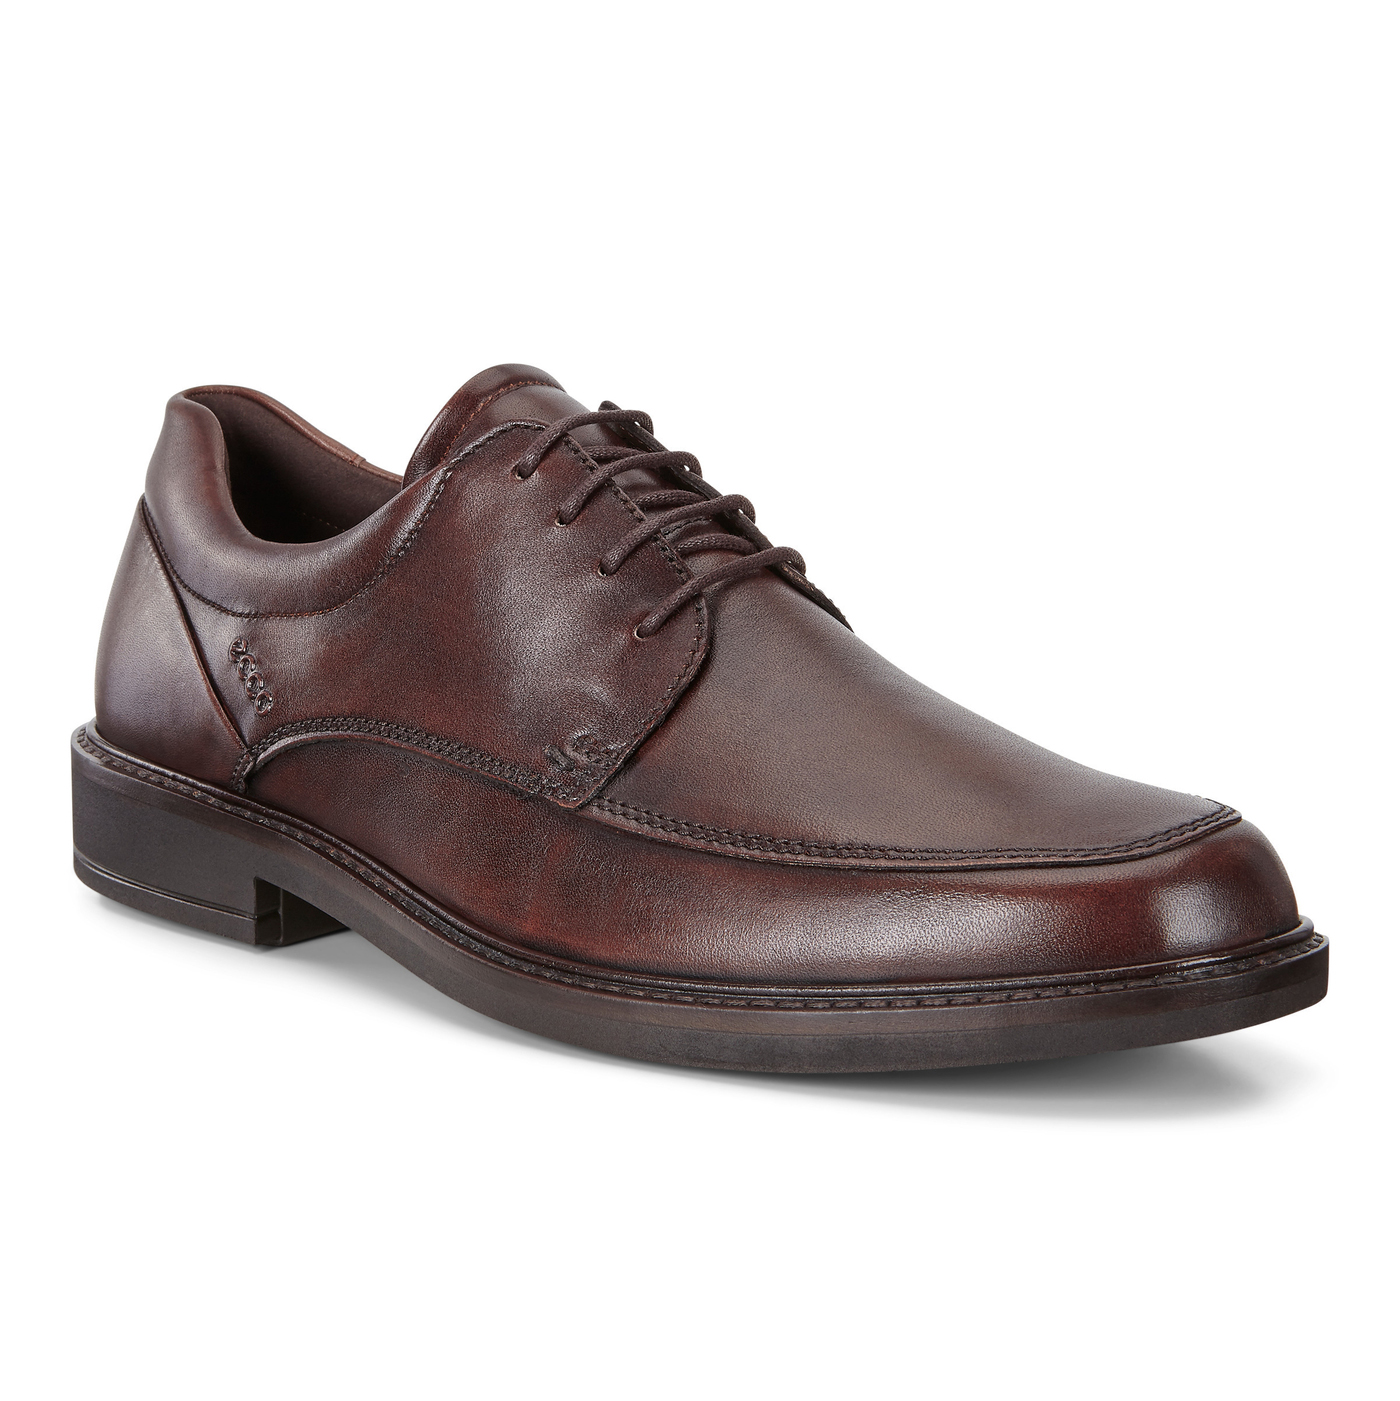 Mens Shoes Lace-ups Oxford shoes for Men Brown Geox Leather Lace-up Shoes in Cocoa 